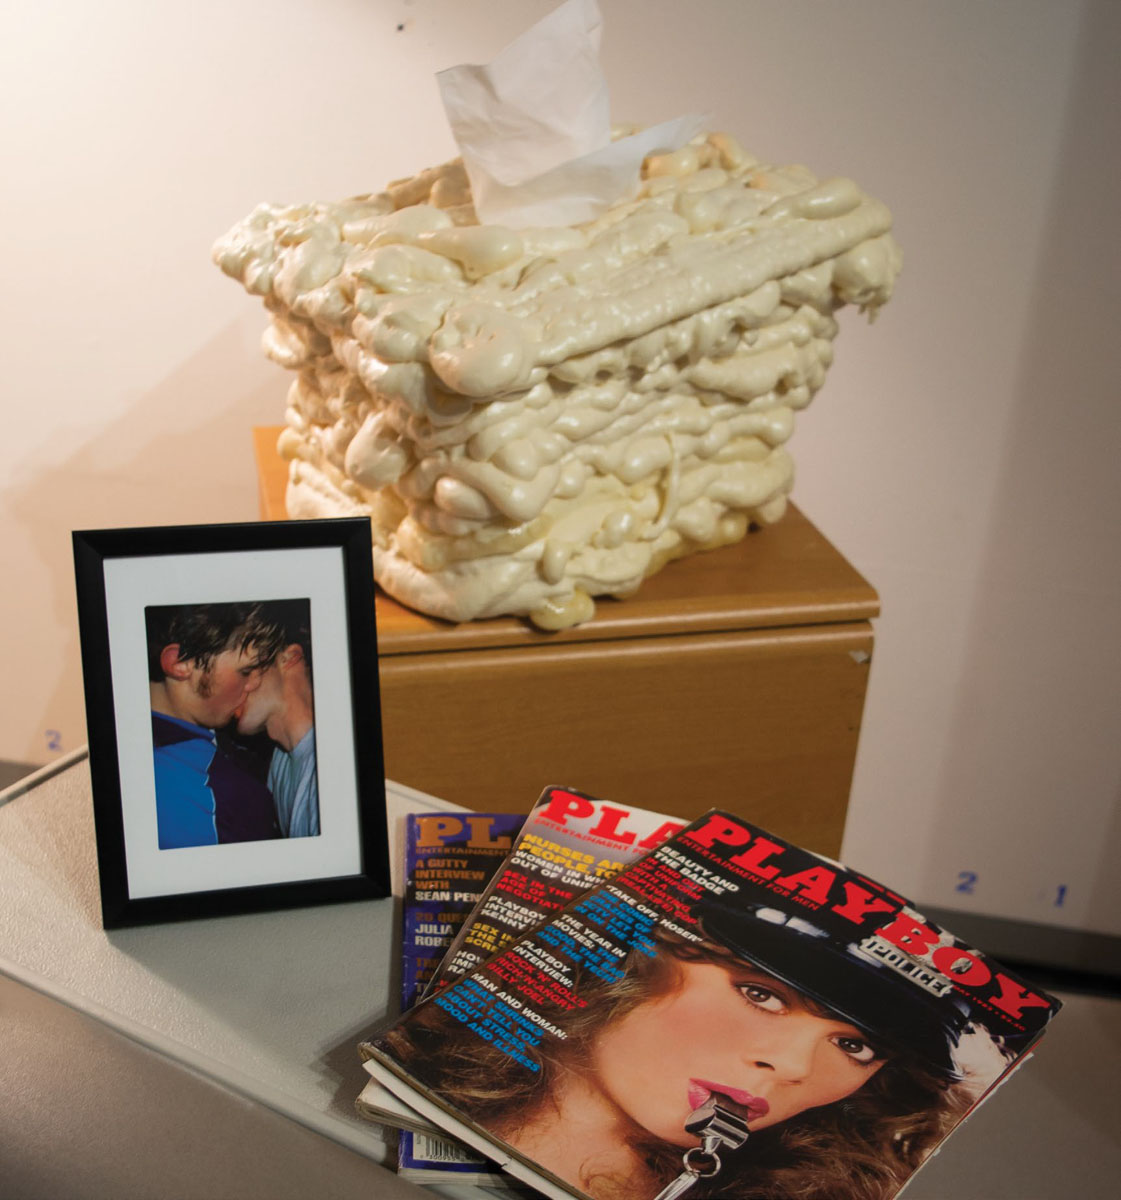 A gloopy tissue box, framed photo, a stack of playboy magazines in the corner of a waiting room